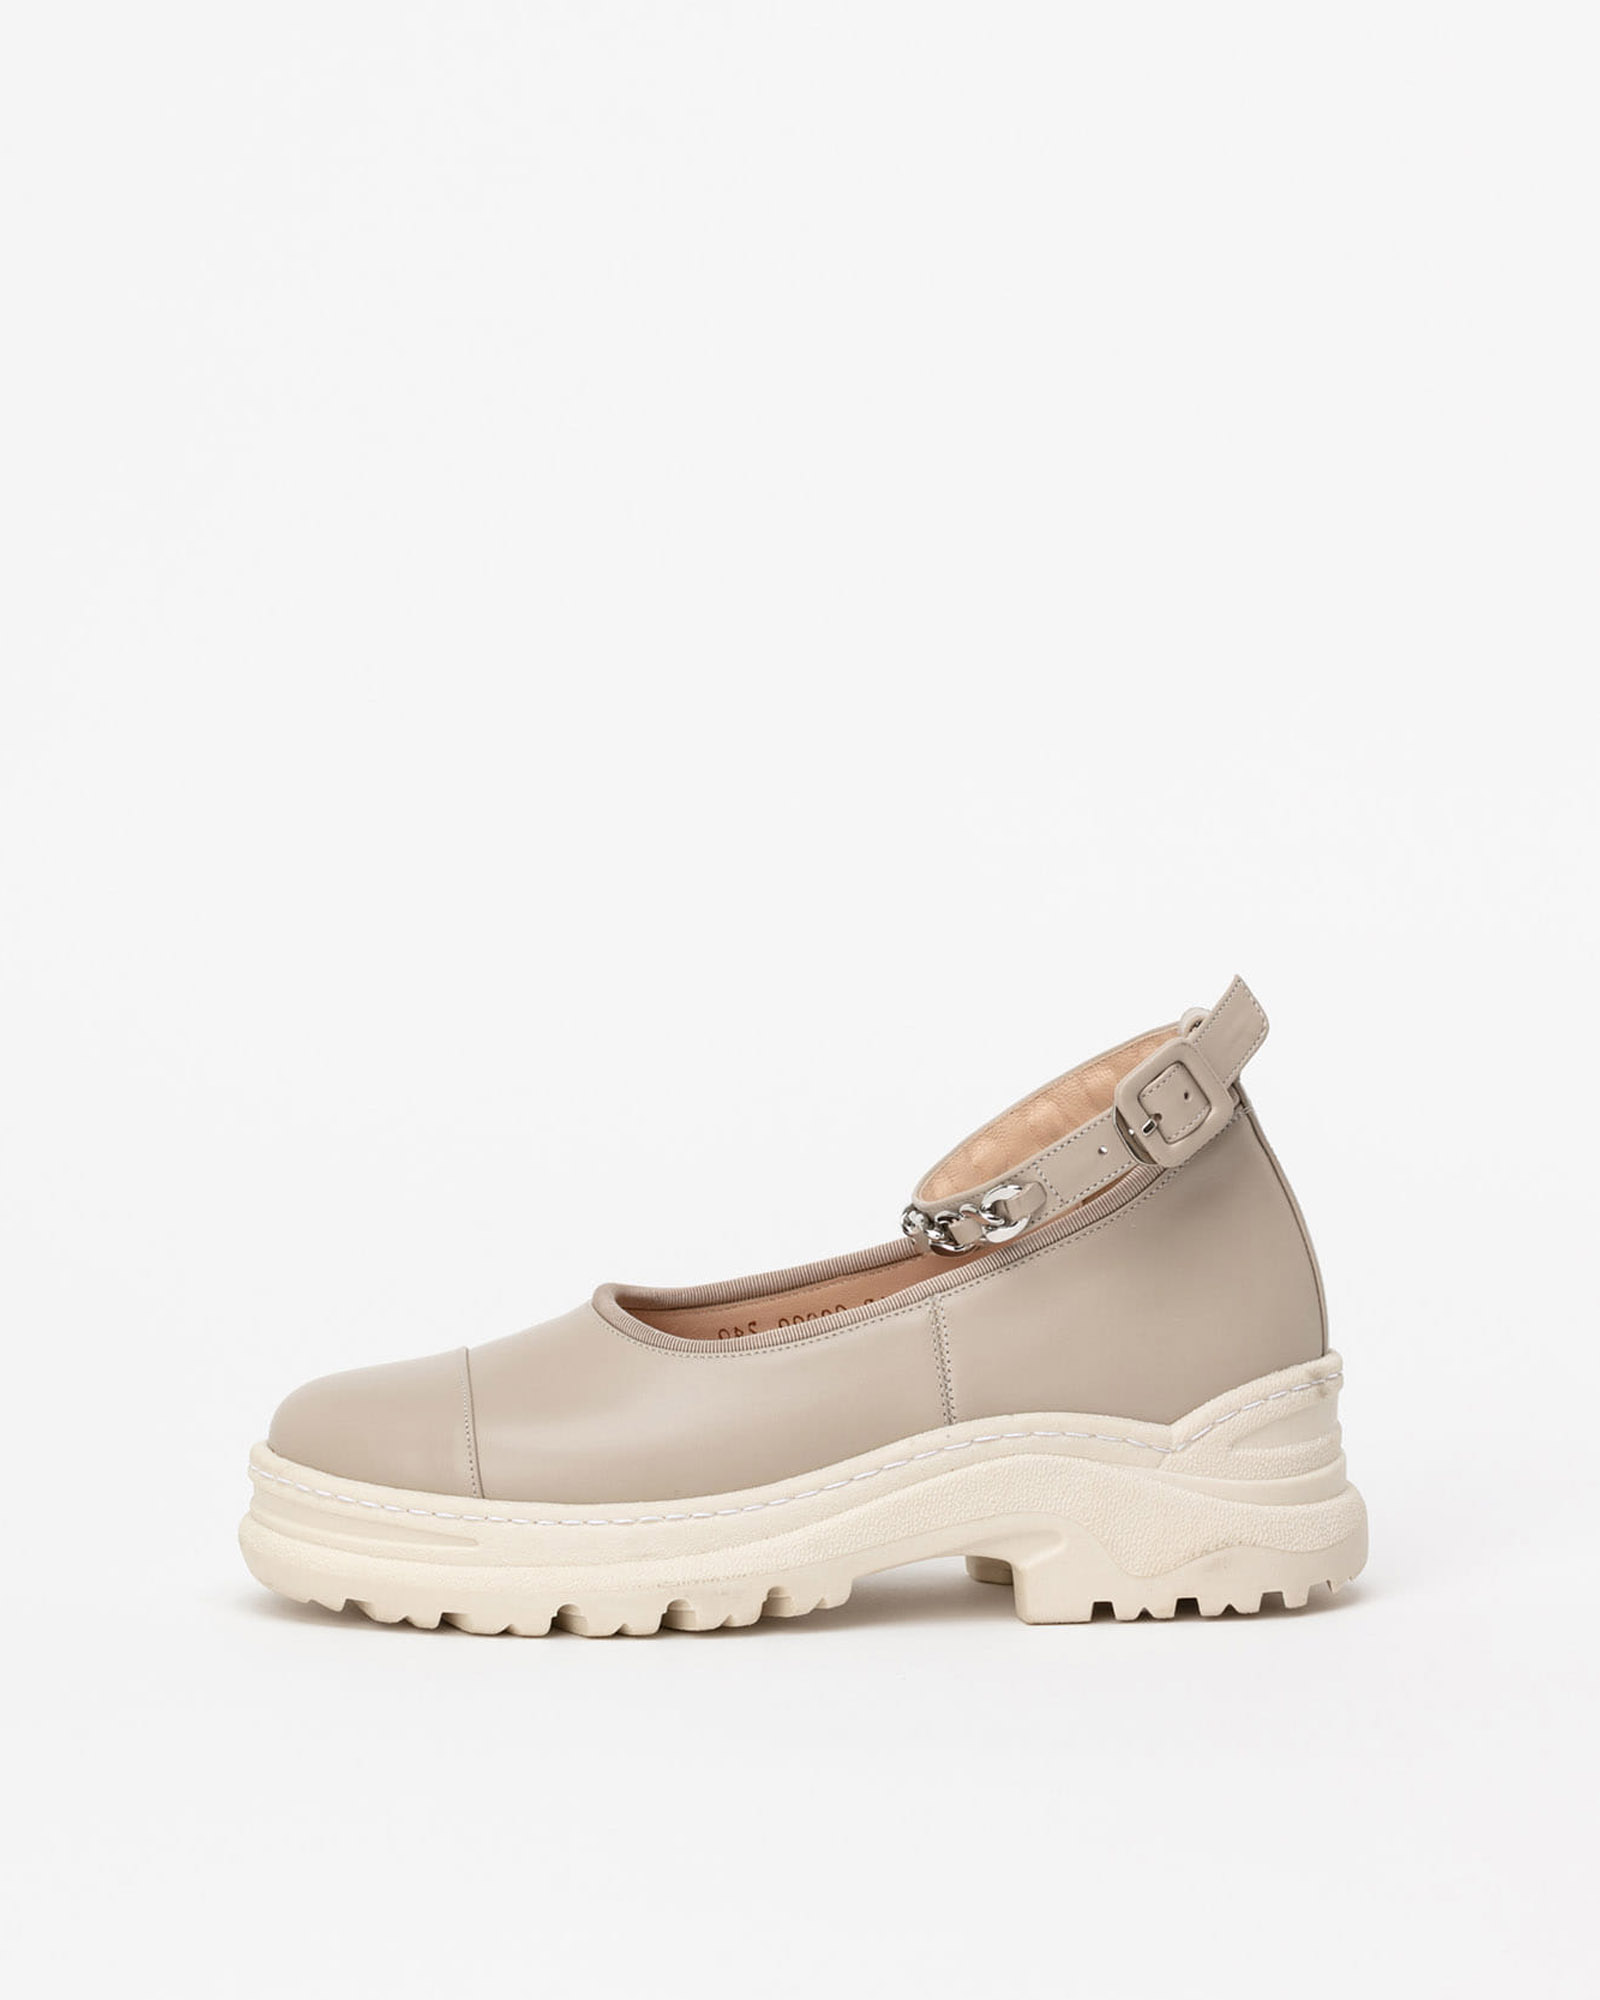 Bitonal  Chain Strap Treksole Shoes in Taupe Ivory